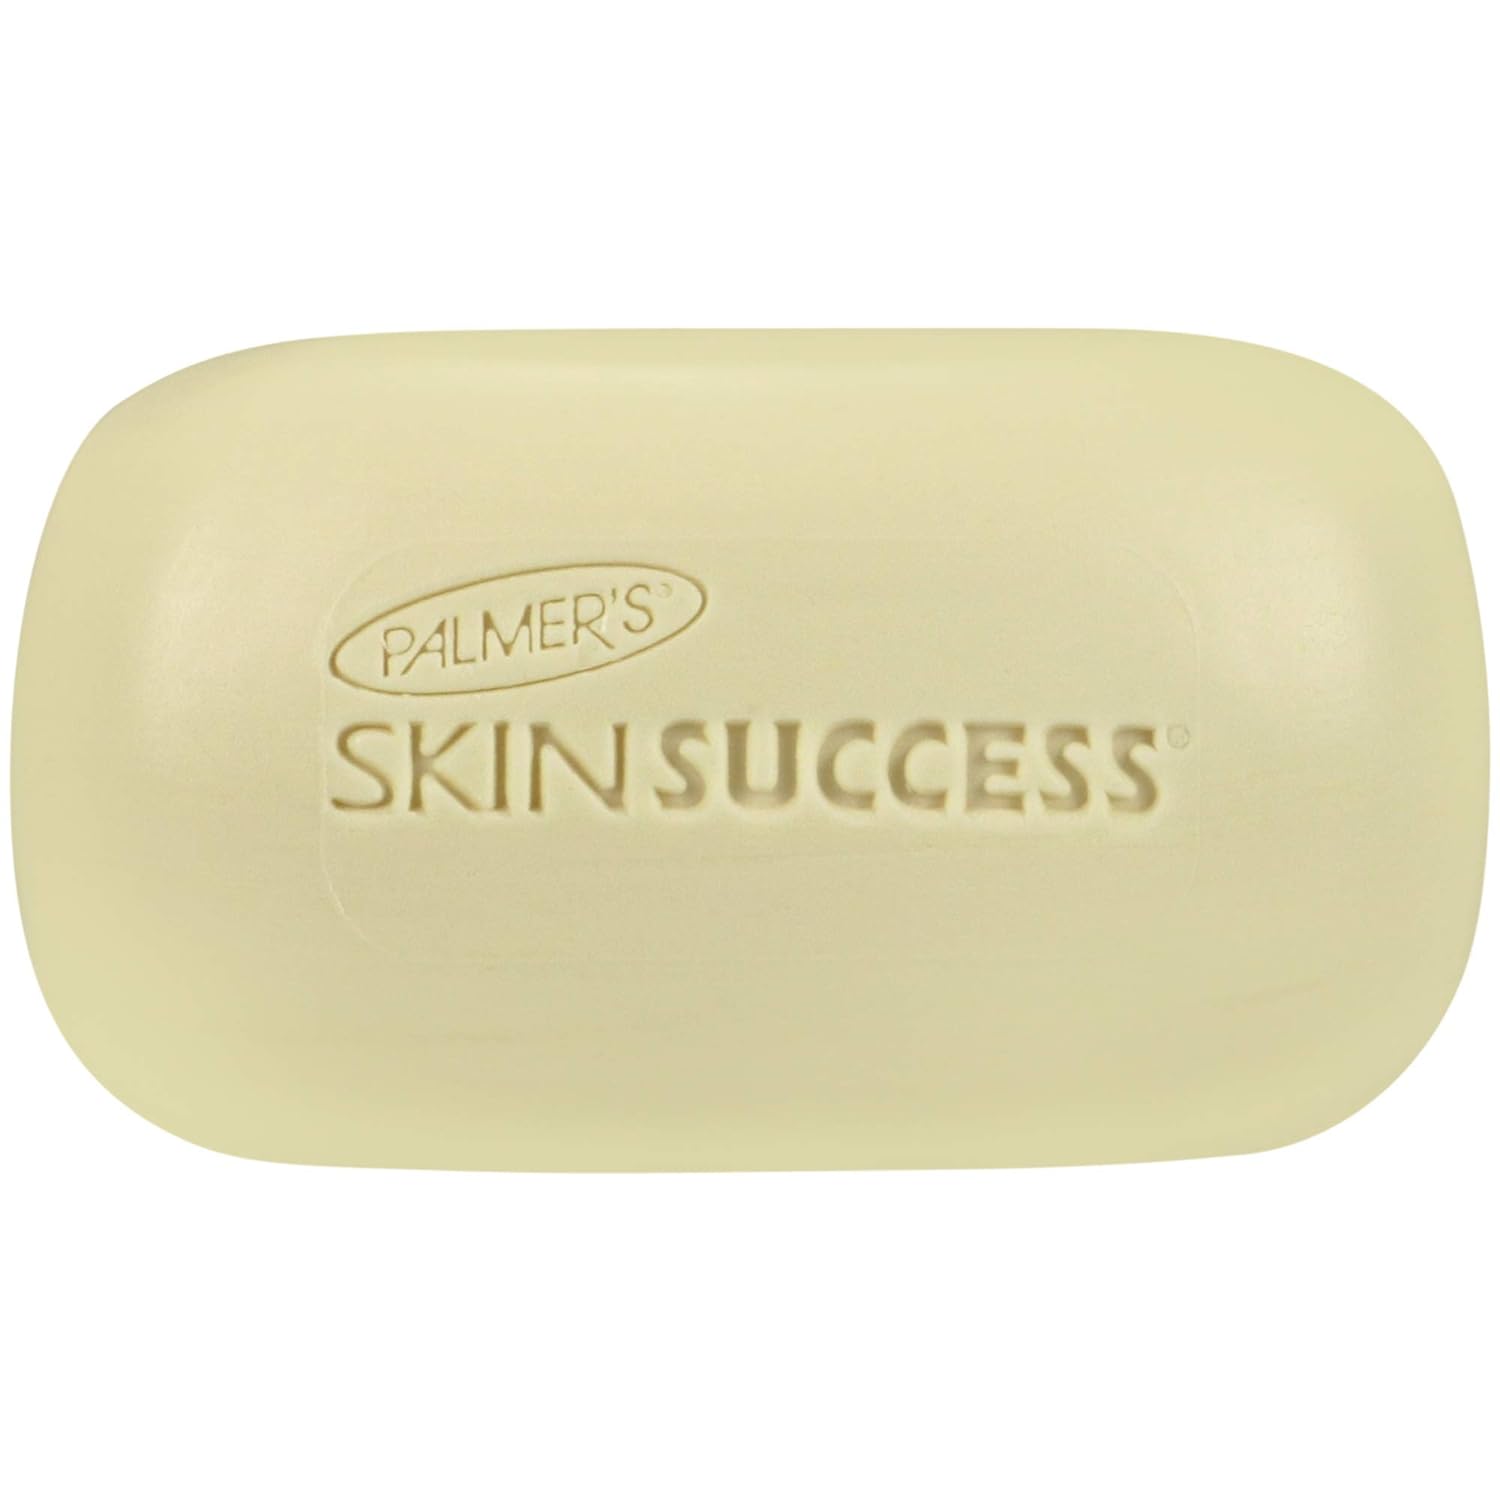 Palmer's Skin Success Eventone Medicated Anti-Acne Complexion Soap Bar, 3.5 Ounces (Pack of 12) : Facial Soaps : Beauty & Personal Care